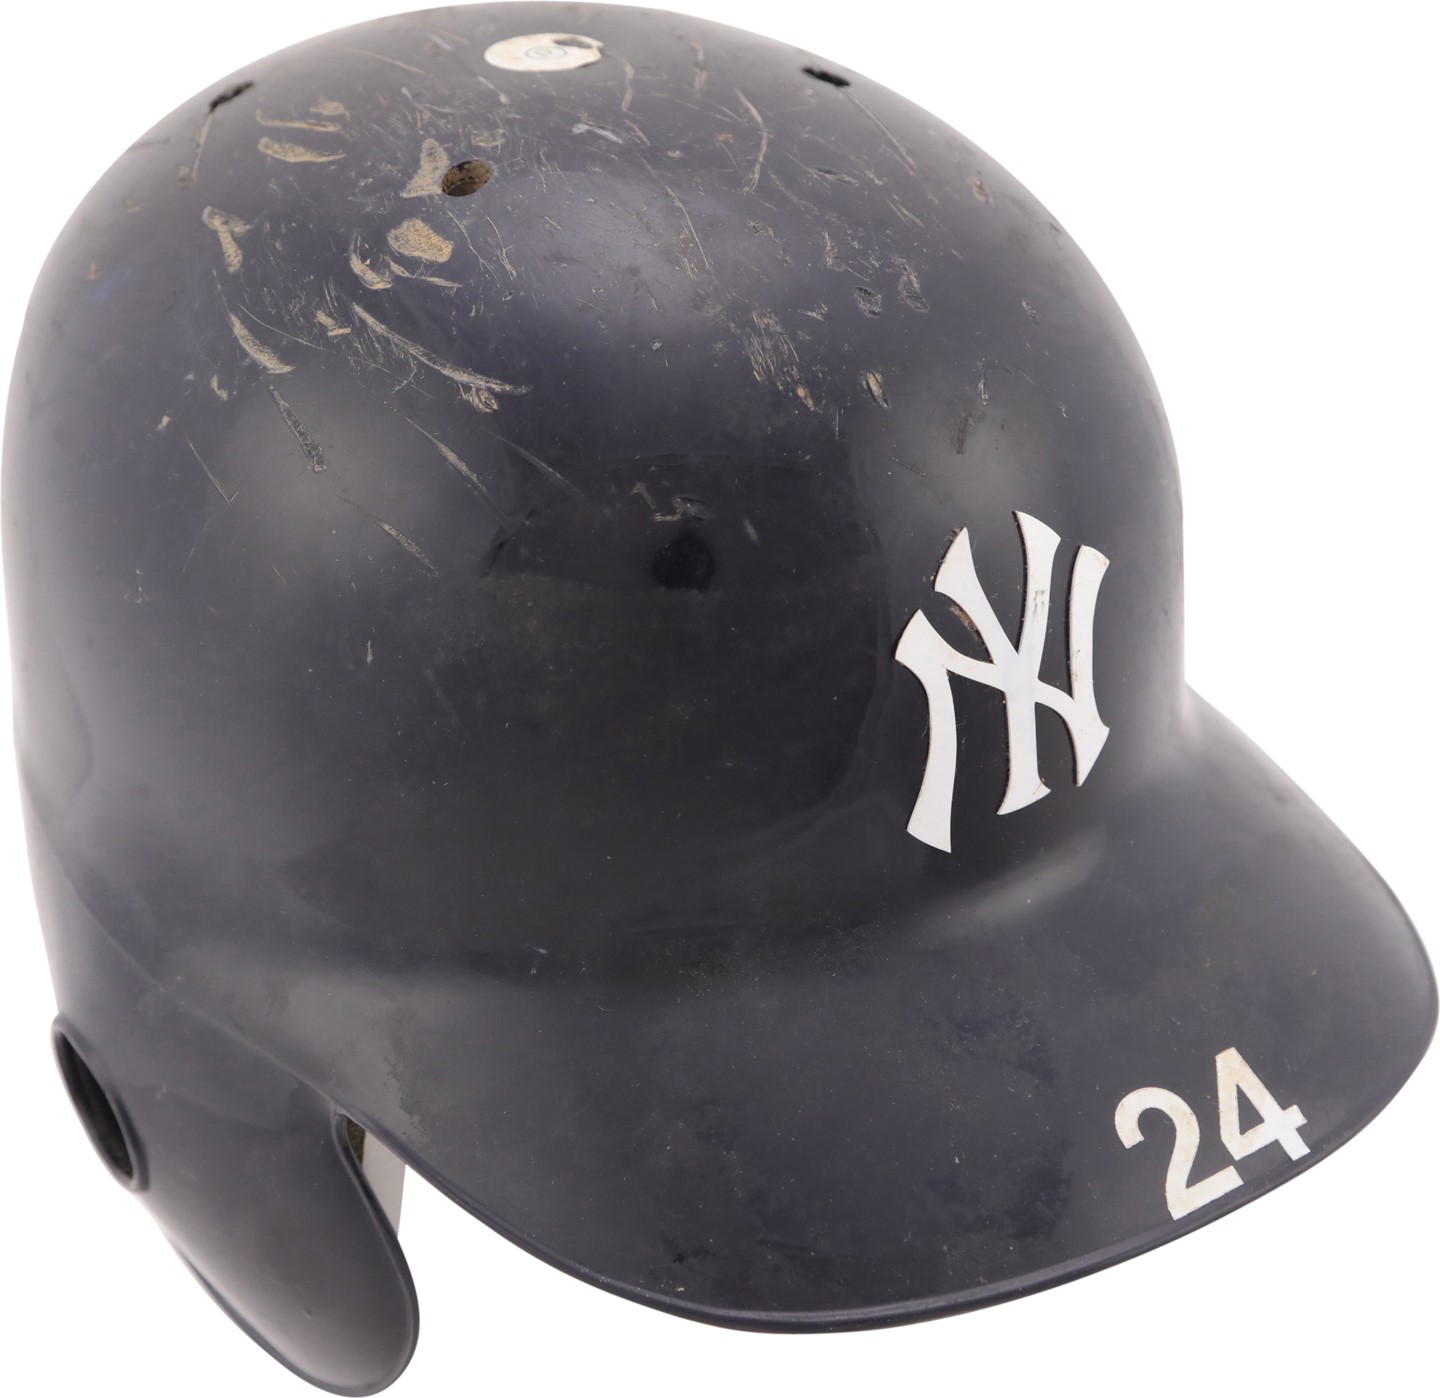 - 2012 Robinson Cano New York Yankees Game Used Helmet Photo-Matched to 19 Games - 5 HRs / 32 Hits / 16 RBI ! (MLB Holo & Steiner LOA)